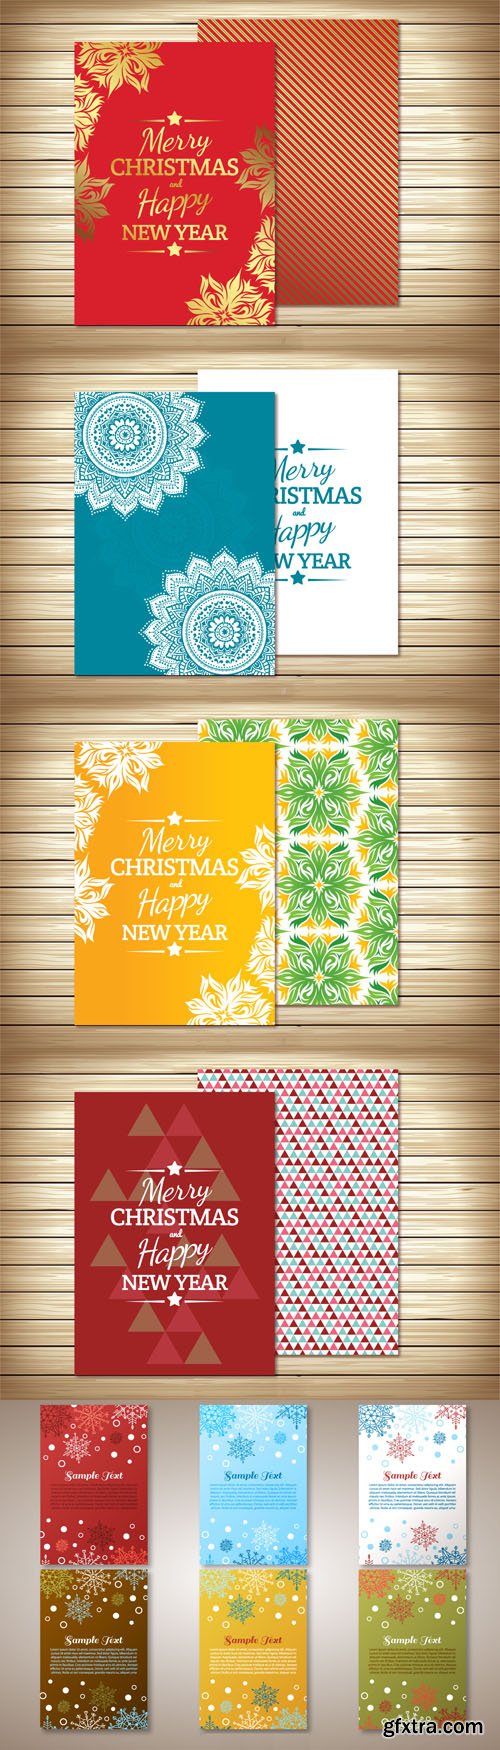 Colorful Christmas Greetings Cards in Vector [AI/EPS]